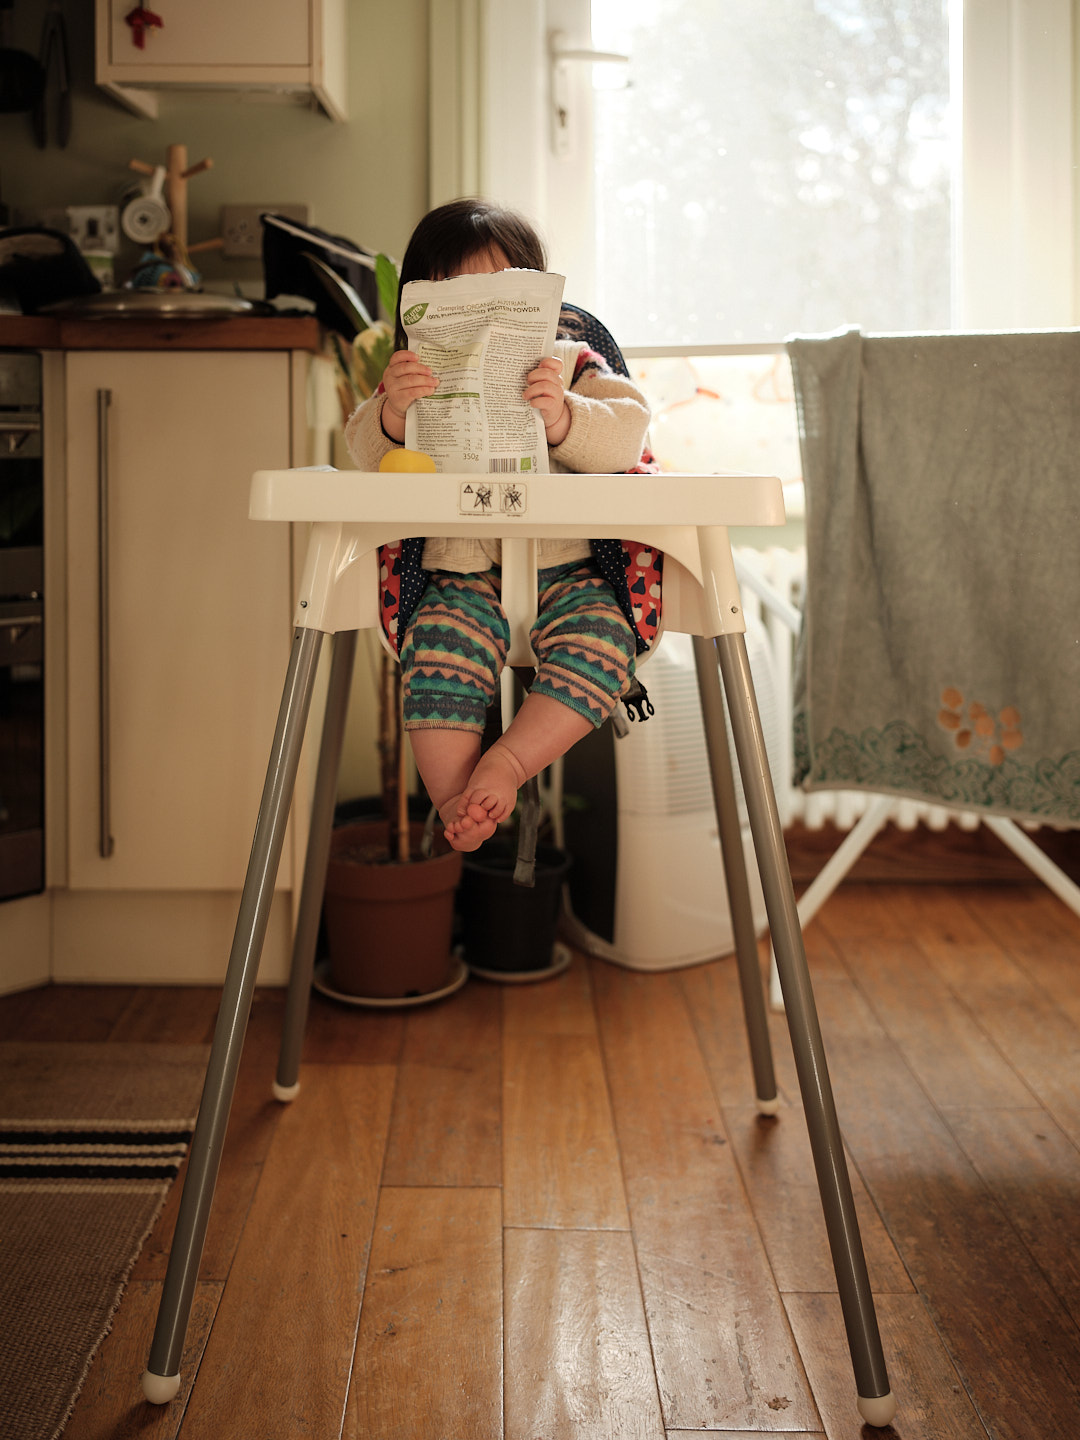 A baby sitting in a high chair in a kitchen, holding a bag of some cooking ingredients in front of her face.